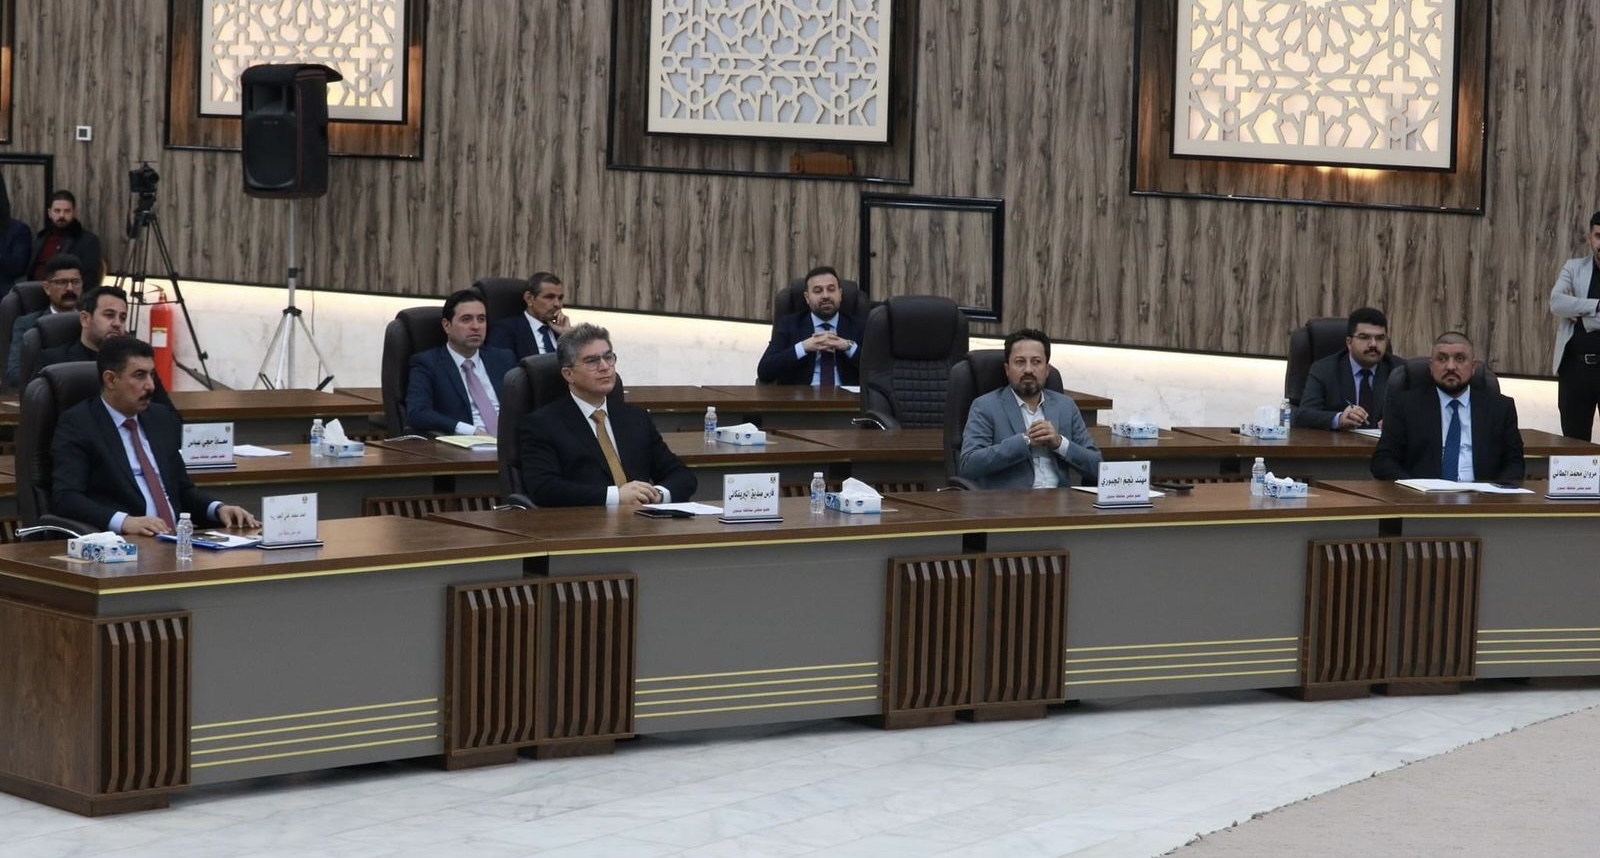 Nineveh council member warns of "coup" against political agreements